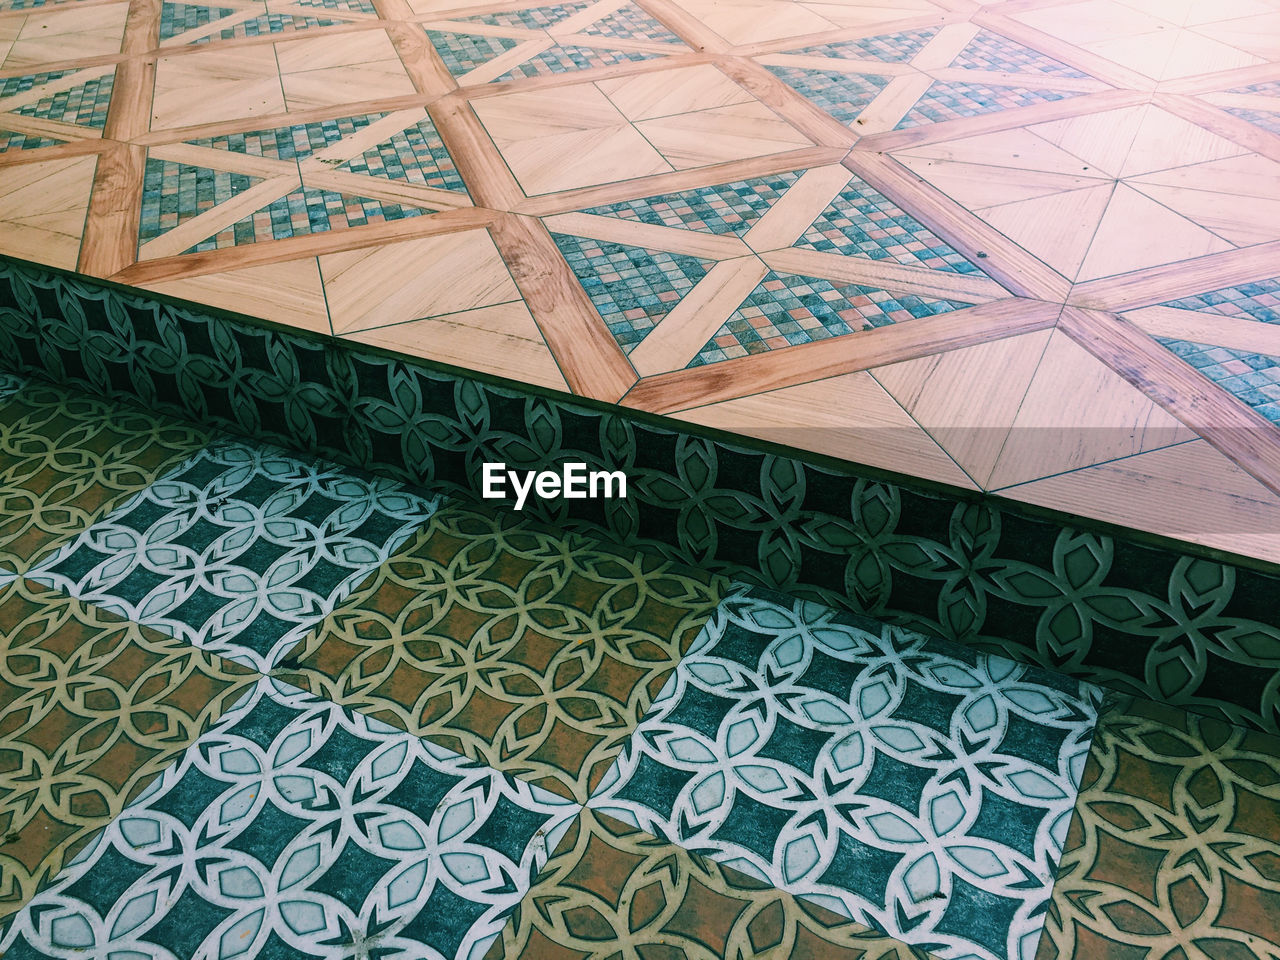 High angle view of patterned floor